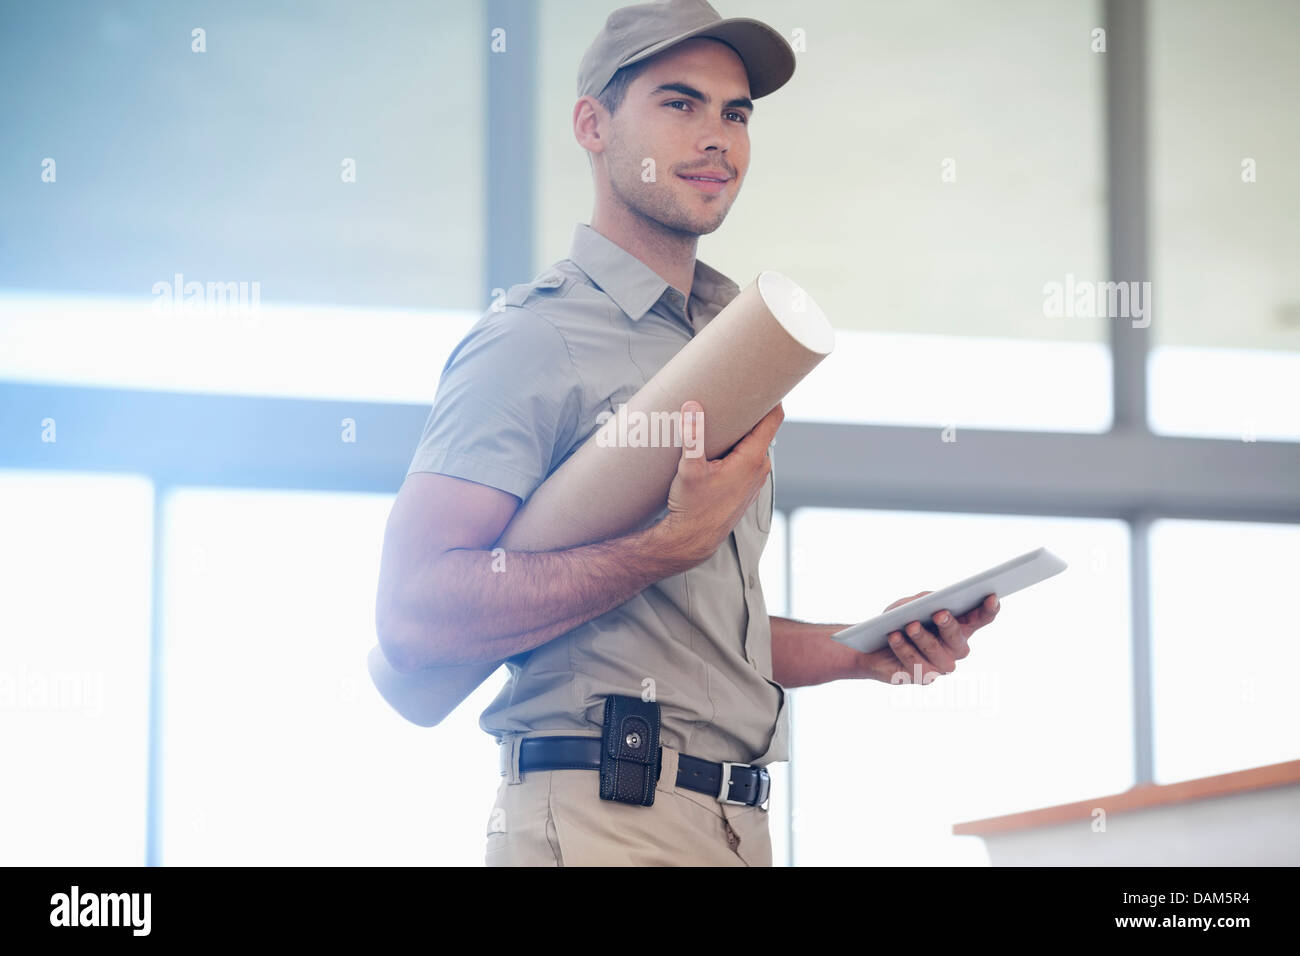 Delivery boy carrying package Stock Photo